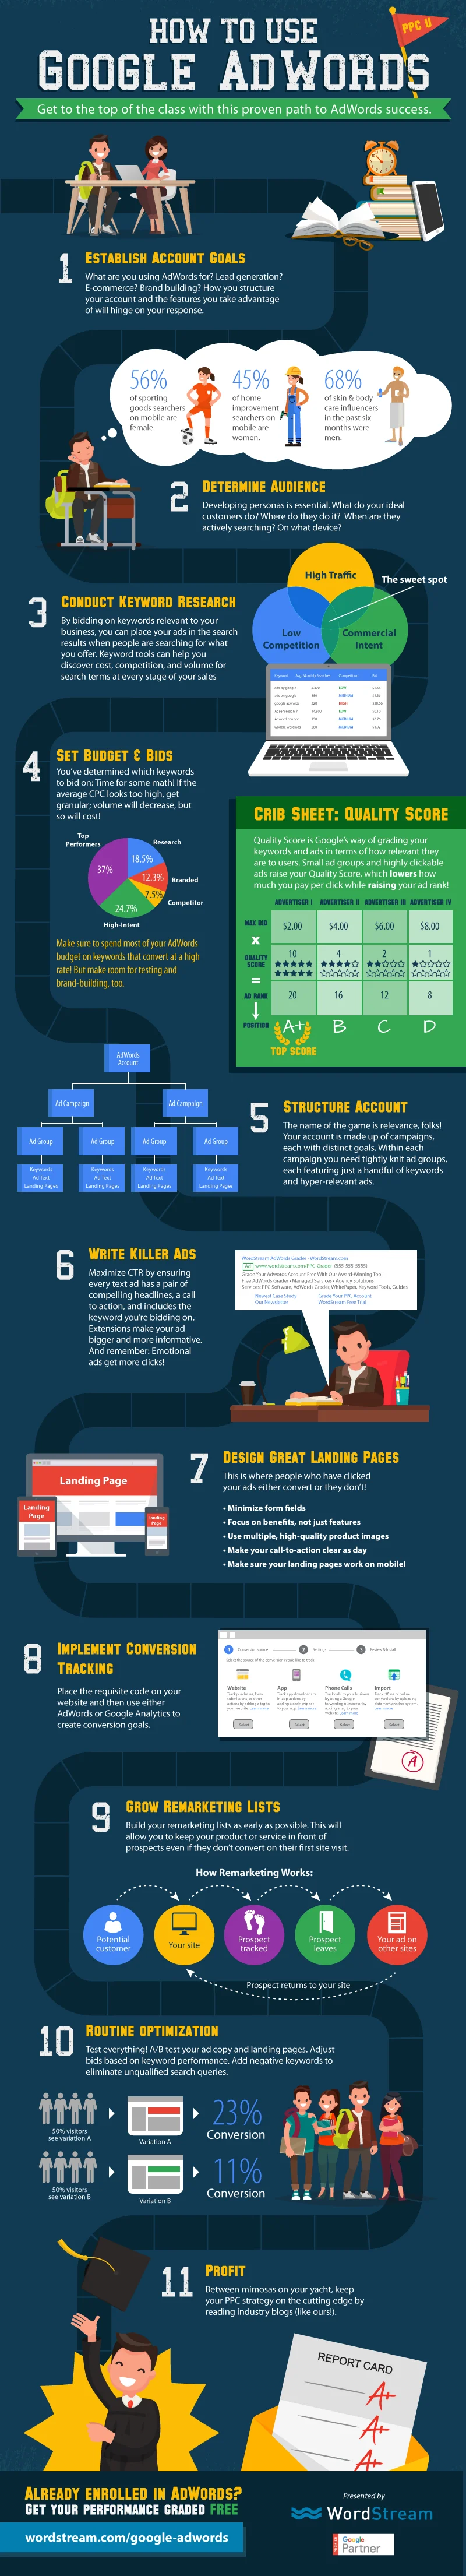 how to use google adwords infographic